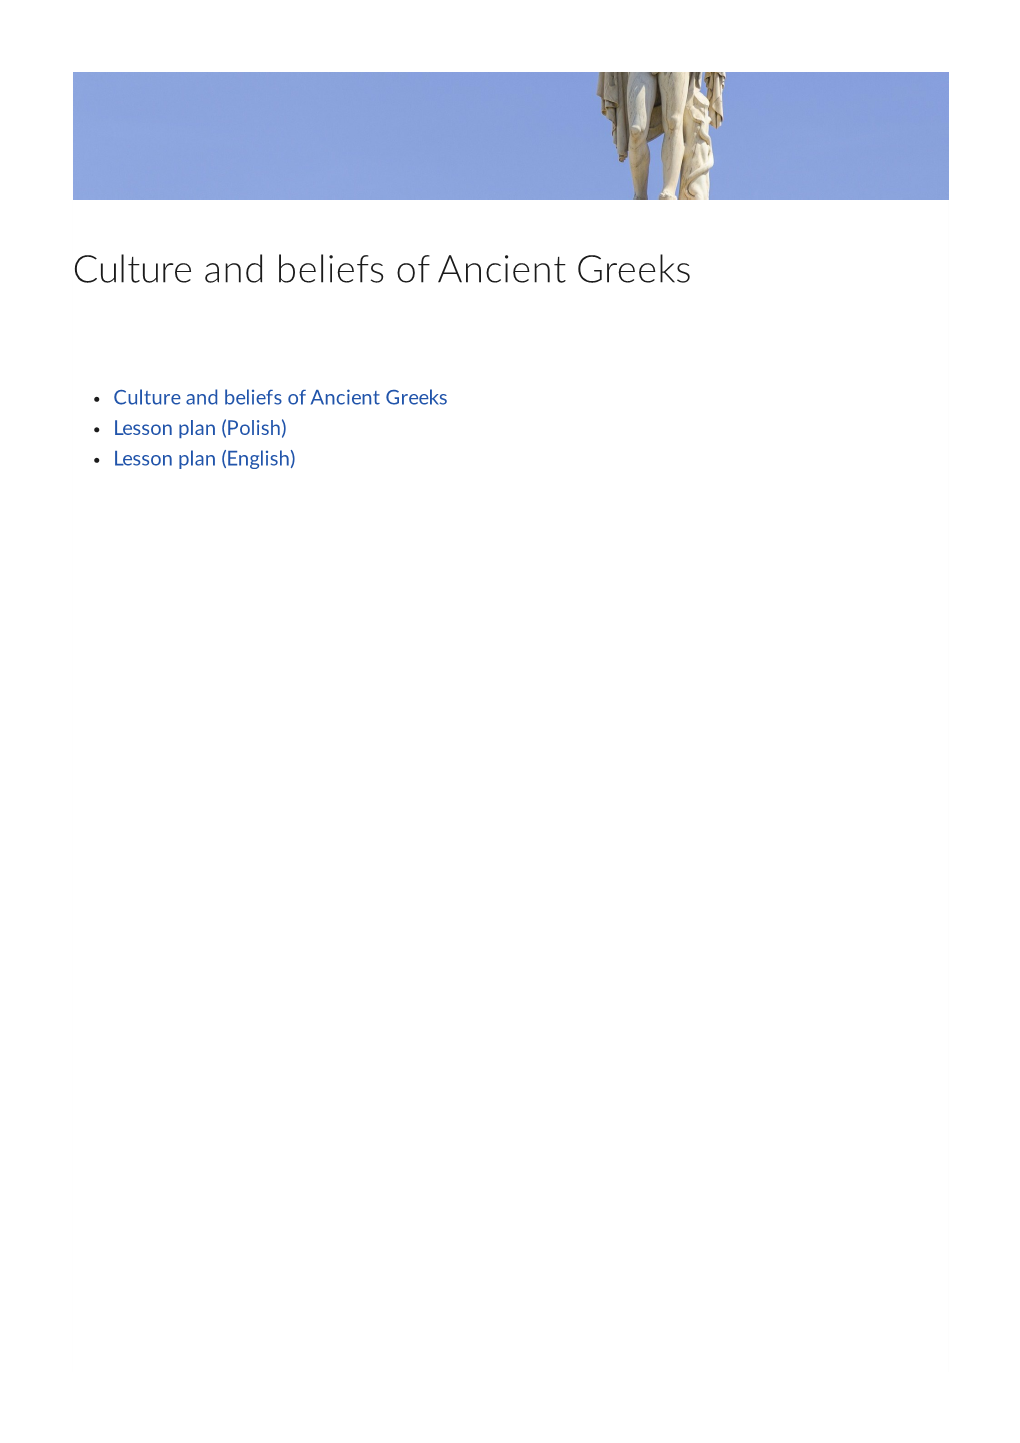 Culture and Beliefs of Ancient Greeks